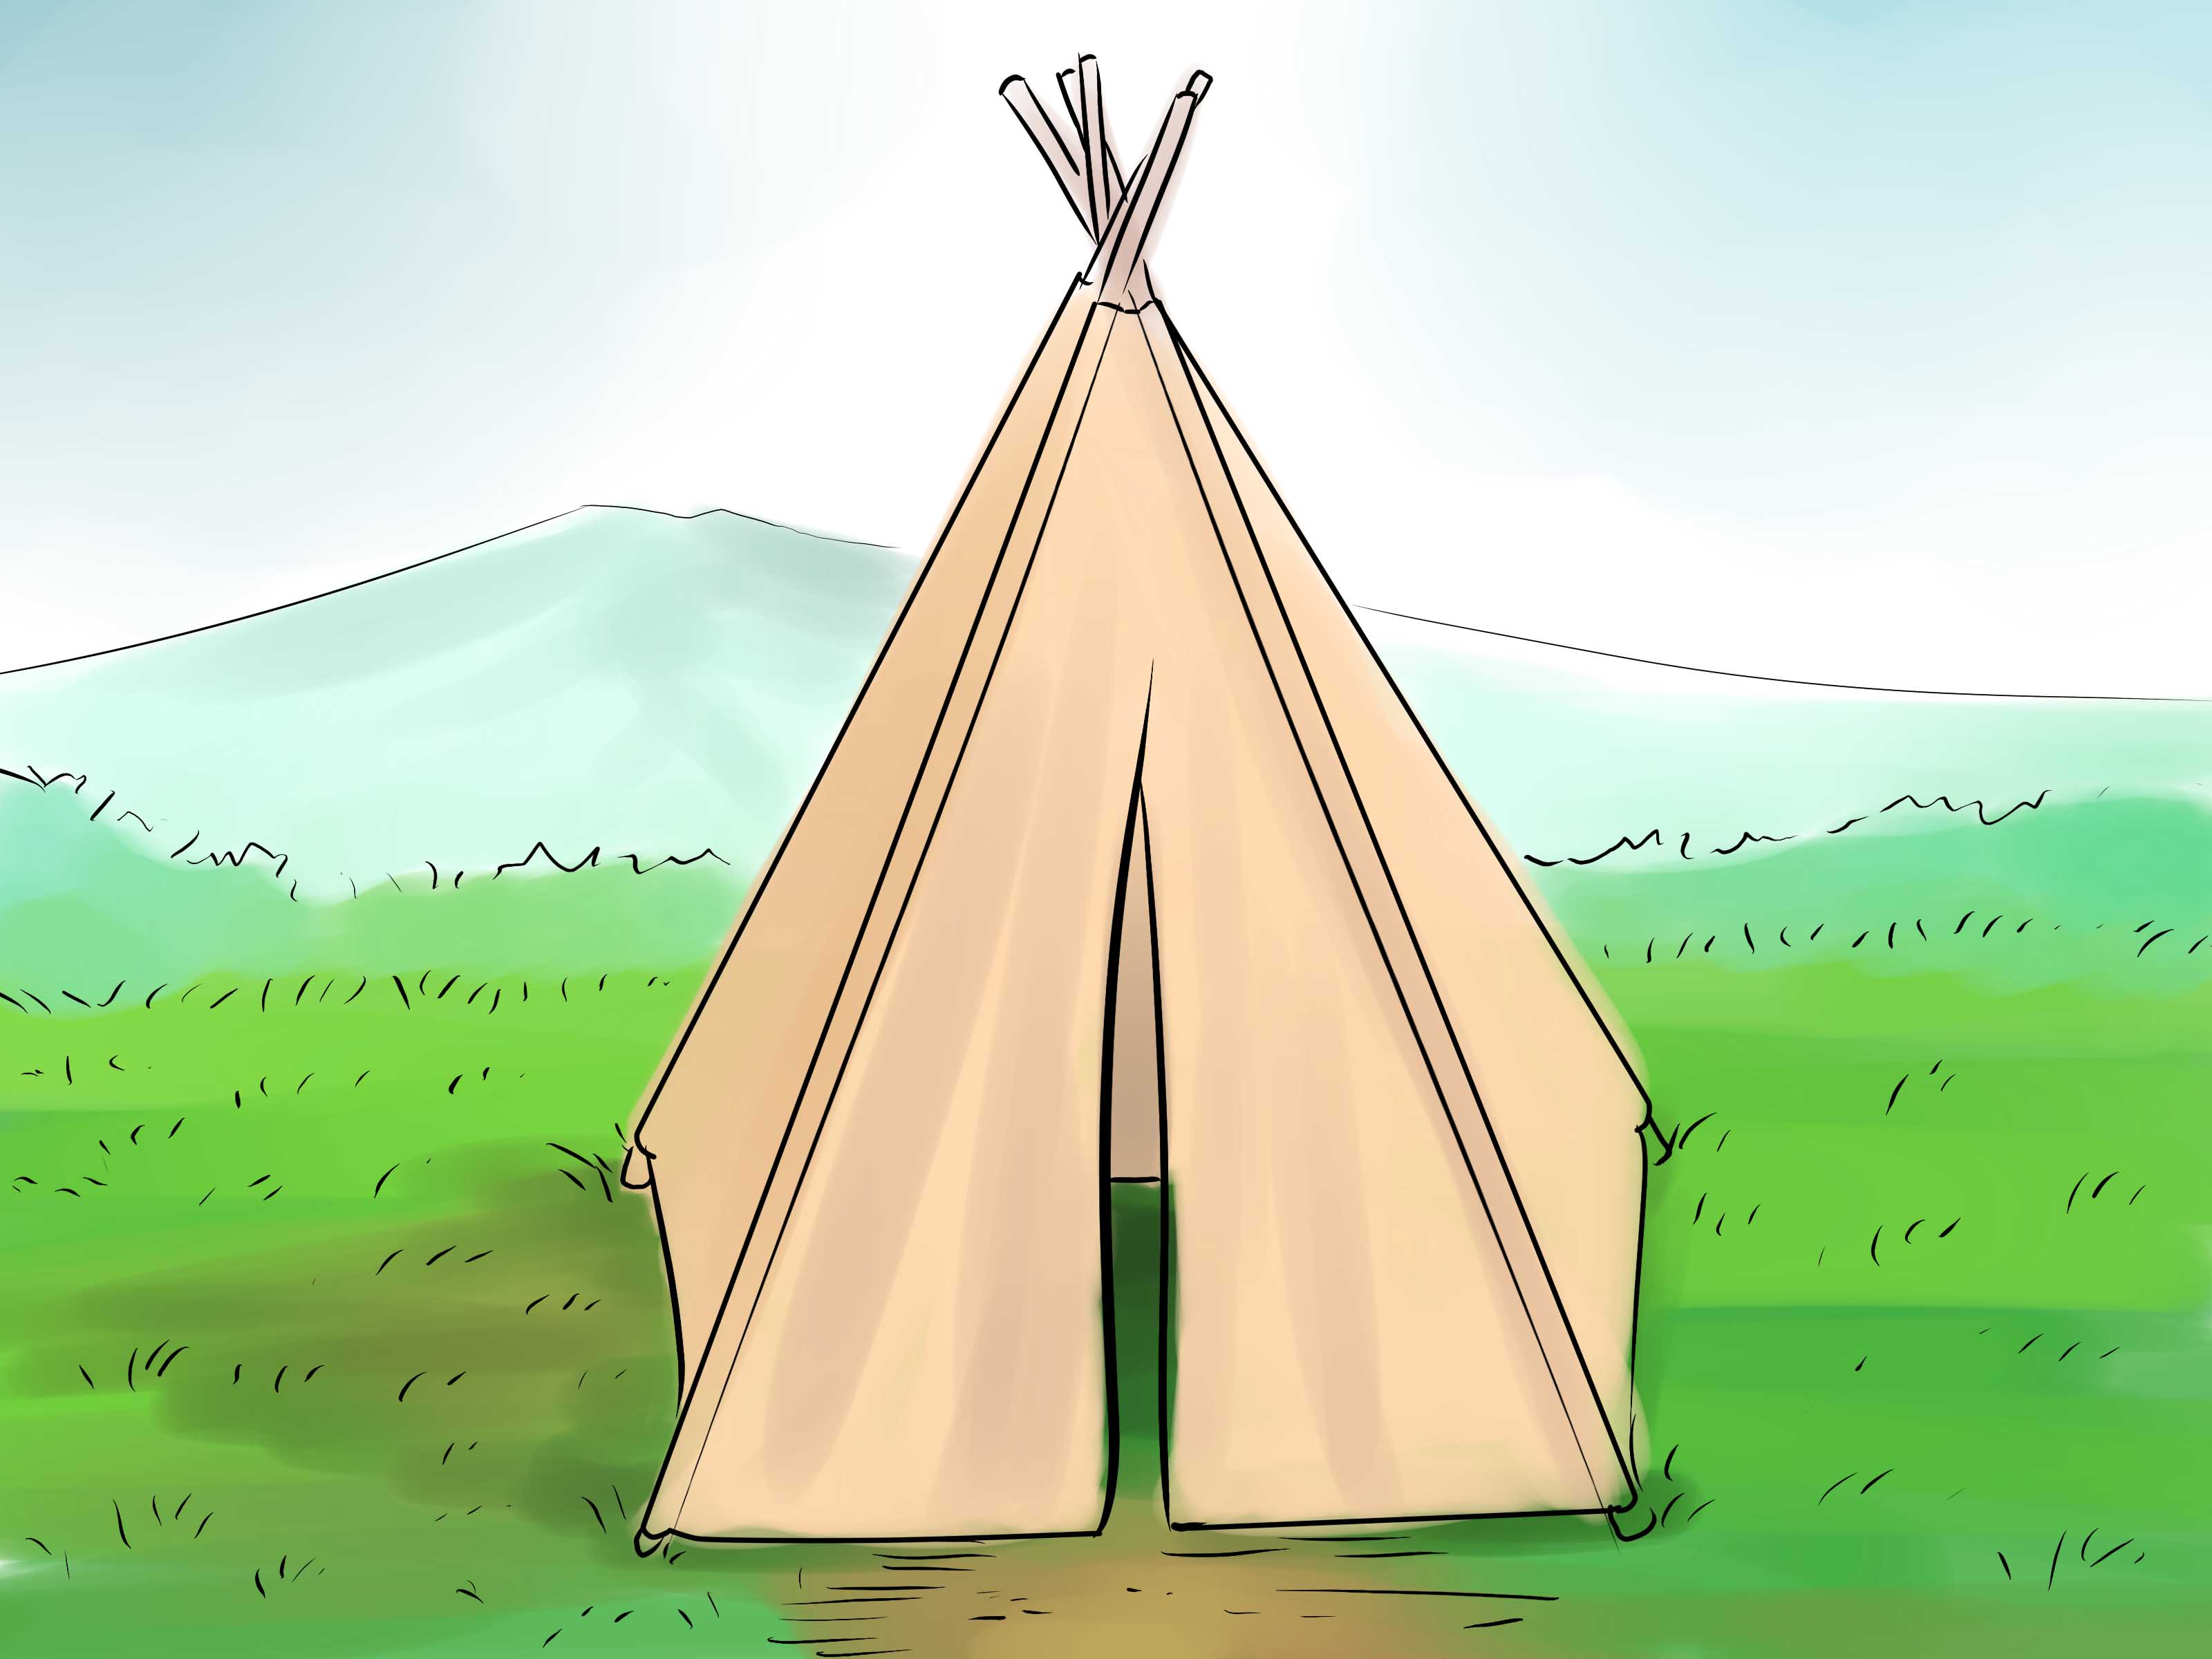 Image Titled Intro - Tent How To Draw A Teepee - HD Wallpaper 